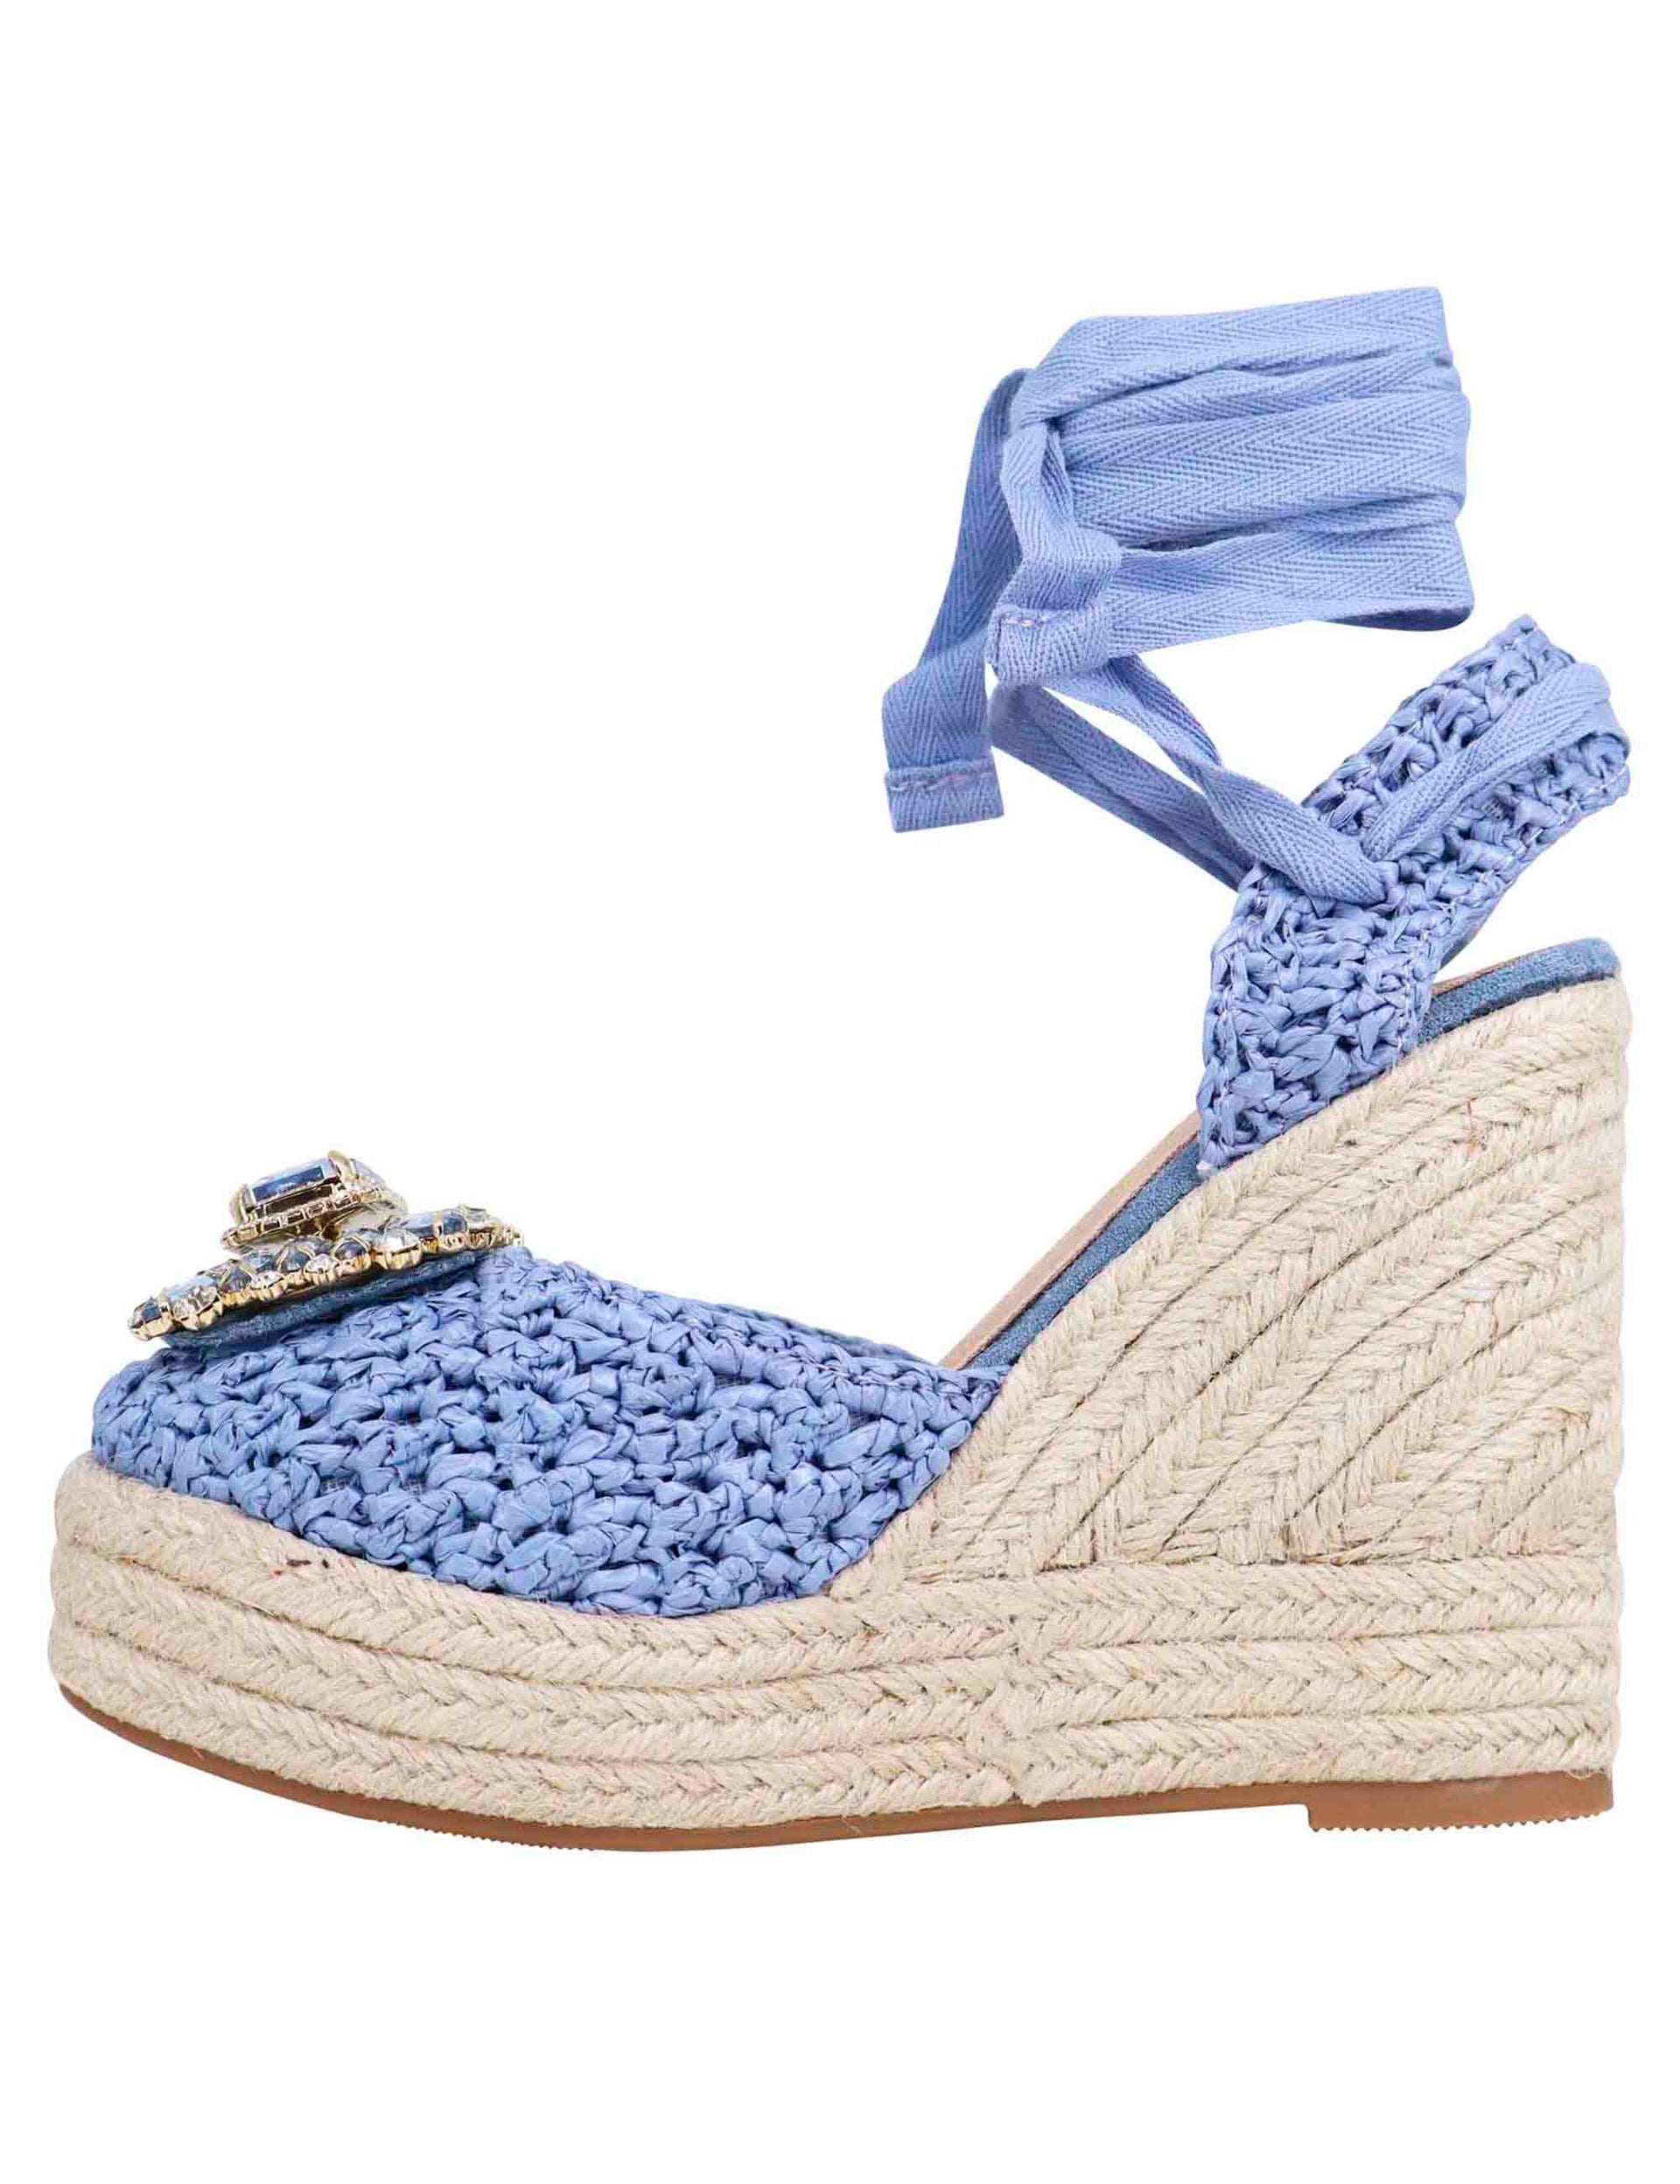 Women's espadrilles sandals in light blue fabric, buckle with matching stones and high rope wedge